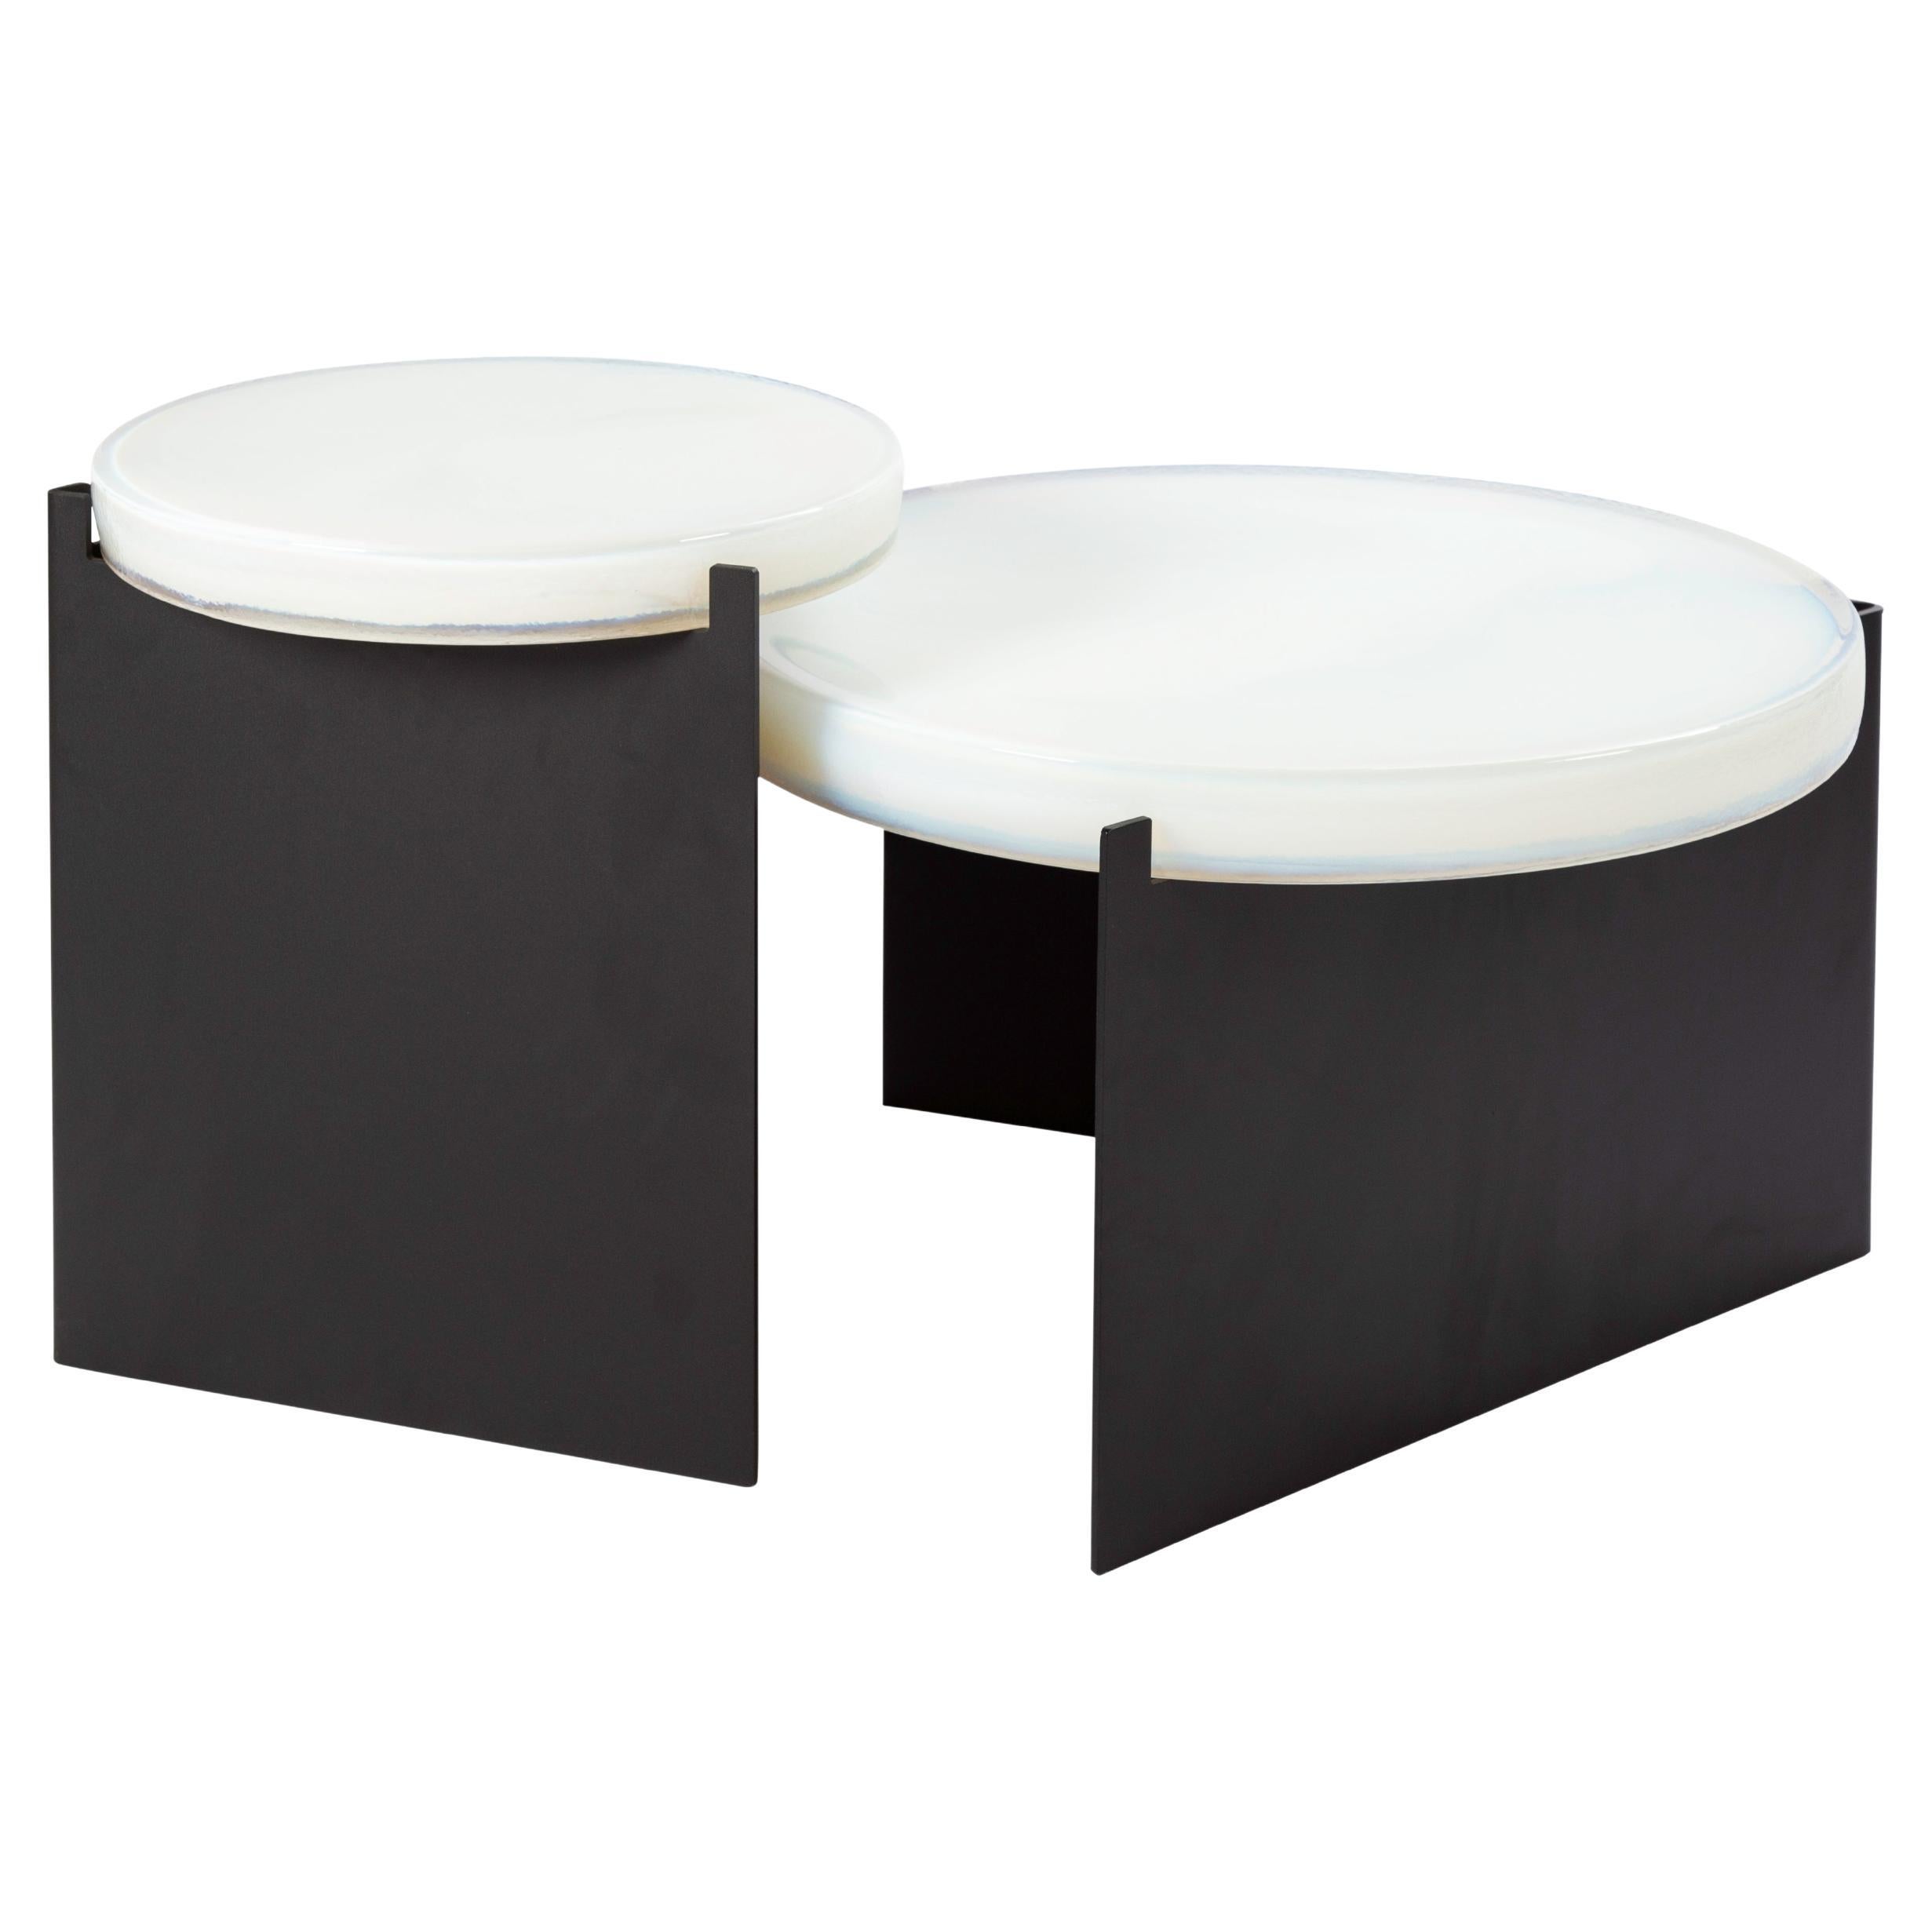 Set of 2 Alwa One Tables by Pulpo For Sale